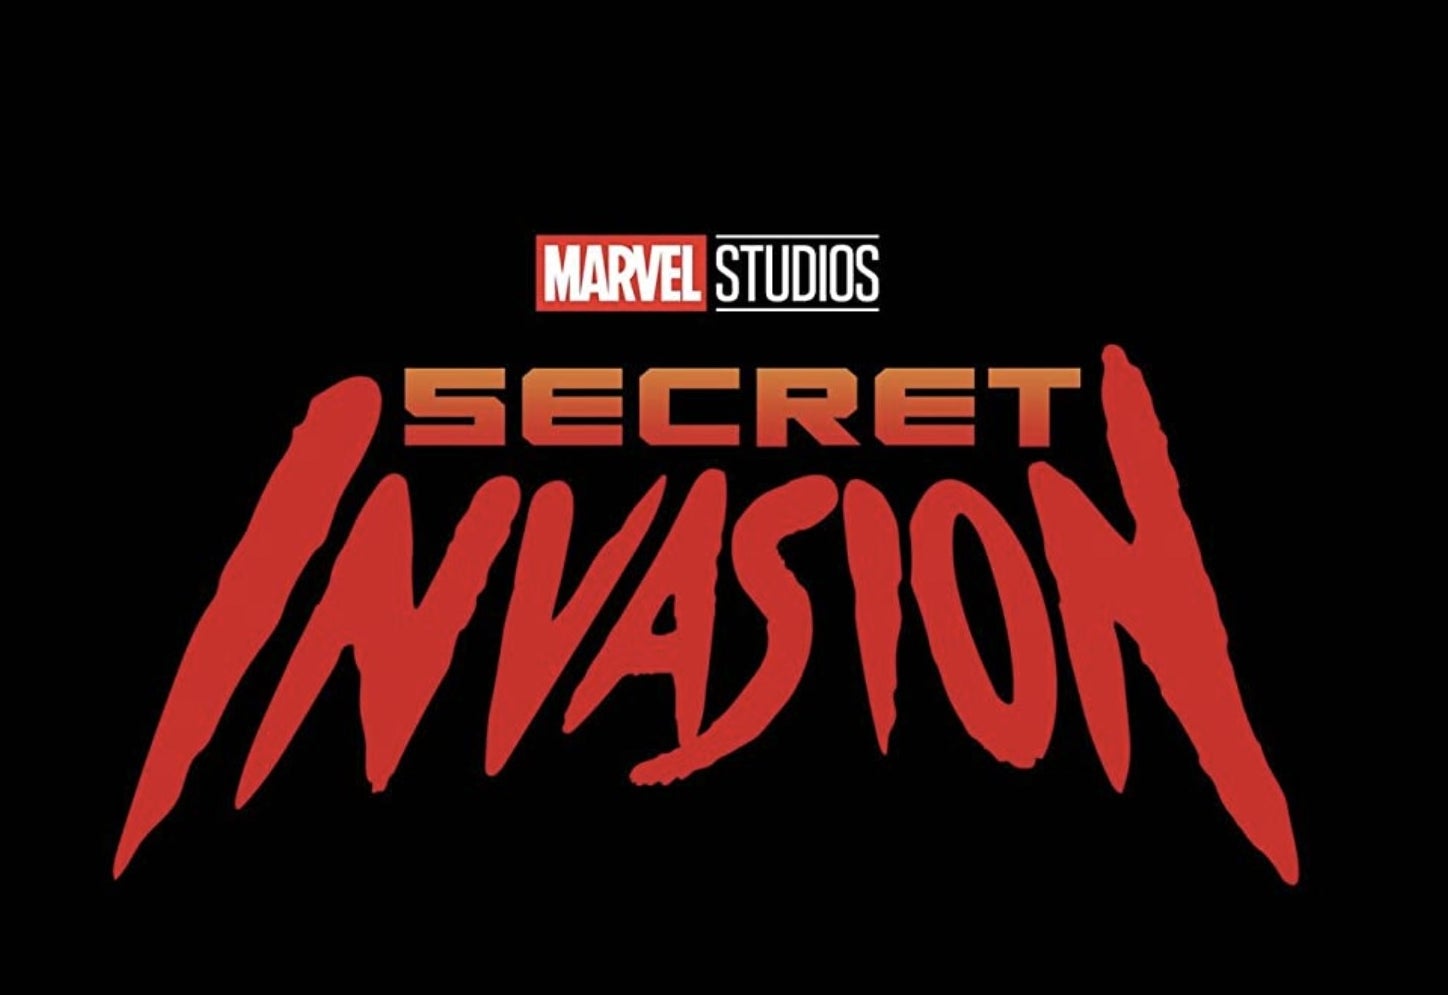 Secret Invasion Full Cast: Every Actor & Character From The Marvel Disney+  Show : r/MCUSpoilers